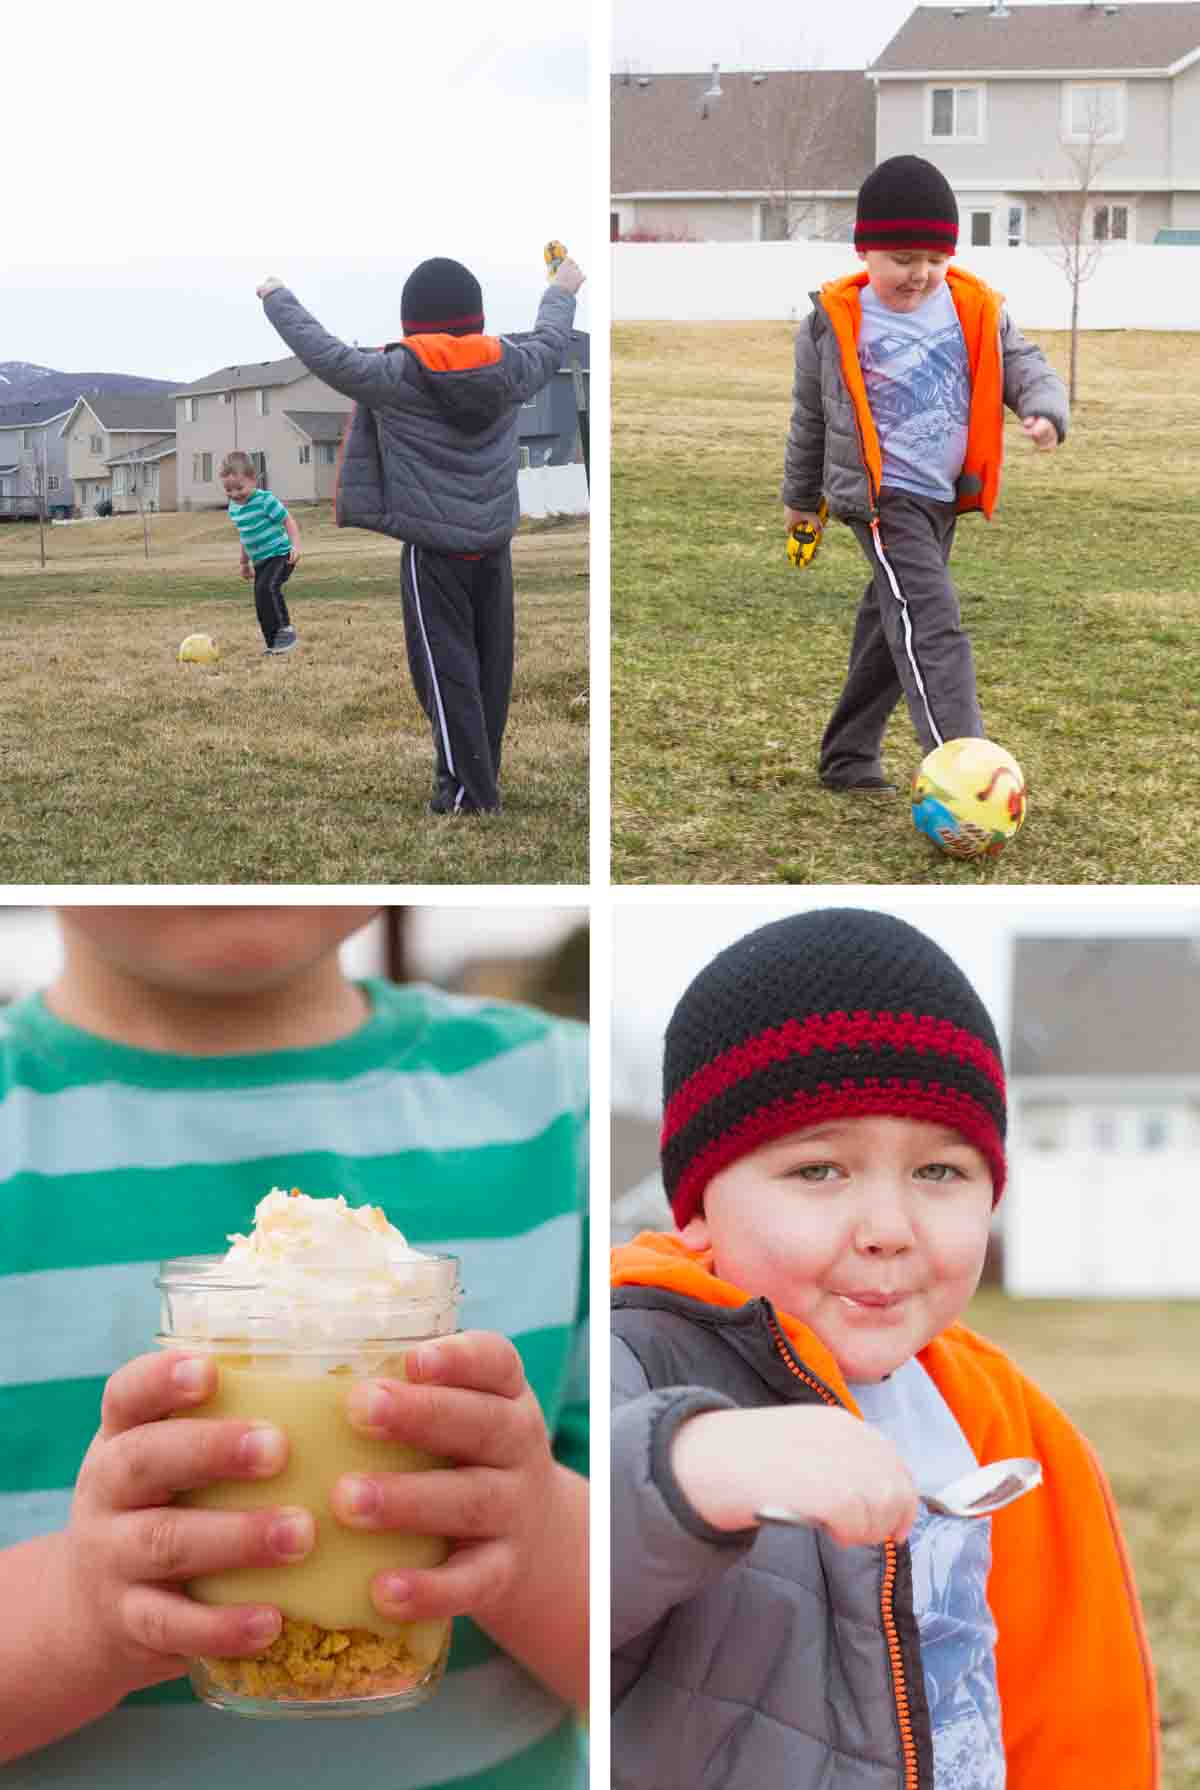 Children playing at a park with a ball and eating a Coconut Lemon Pudding Parfait.